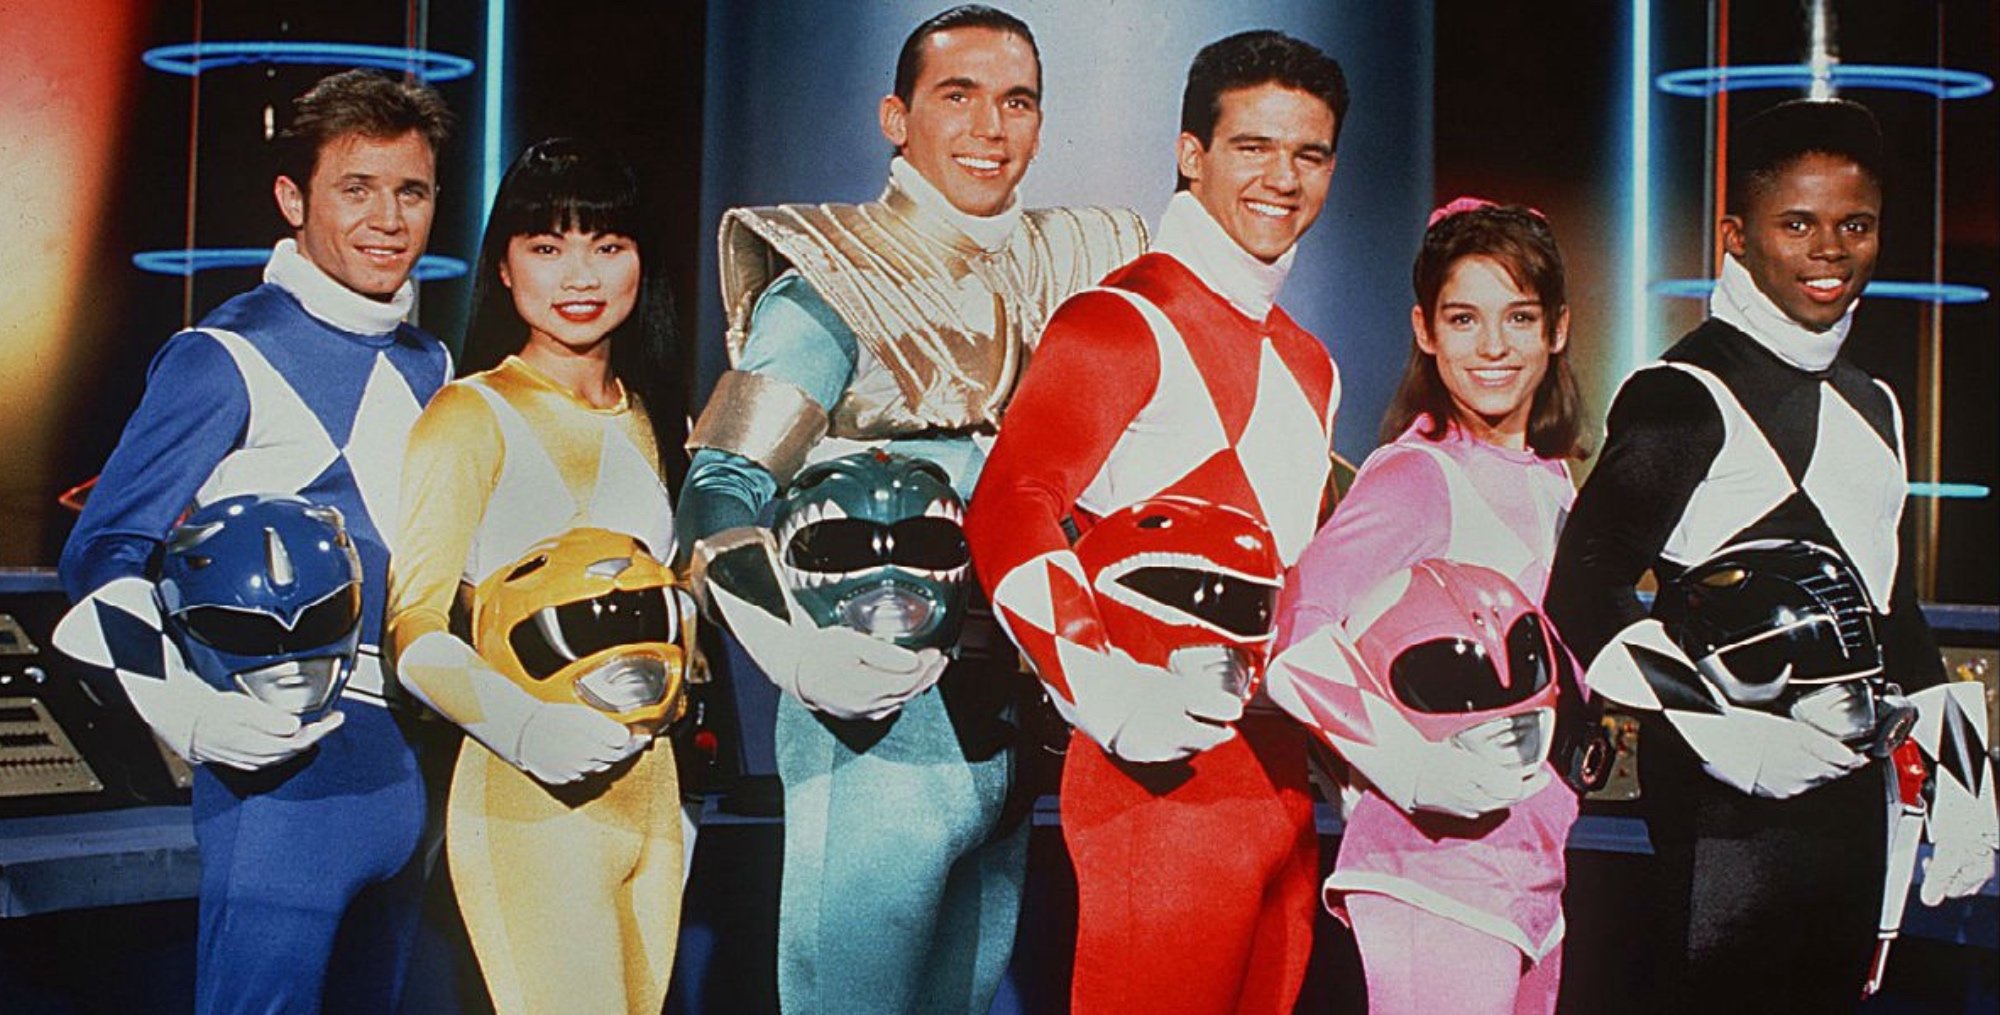 Original cast of 'Mighty Morphin Power Rangers' and franchise curse holding their helmets.